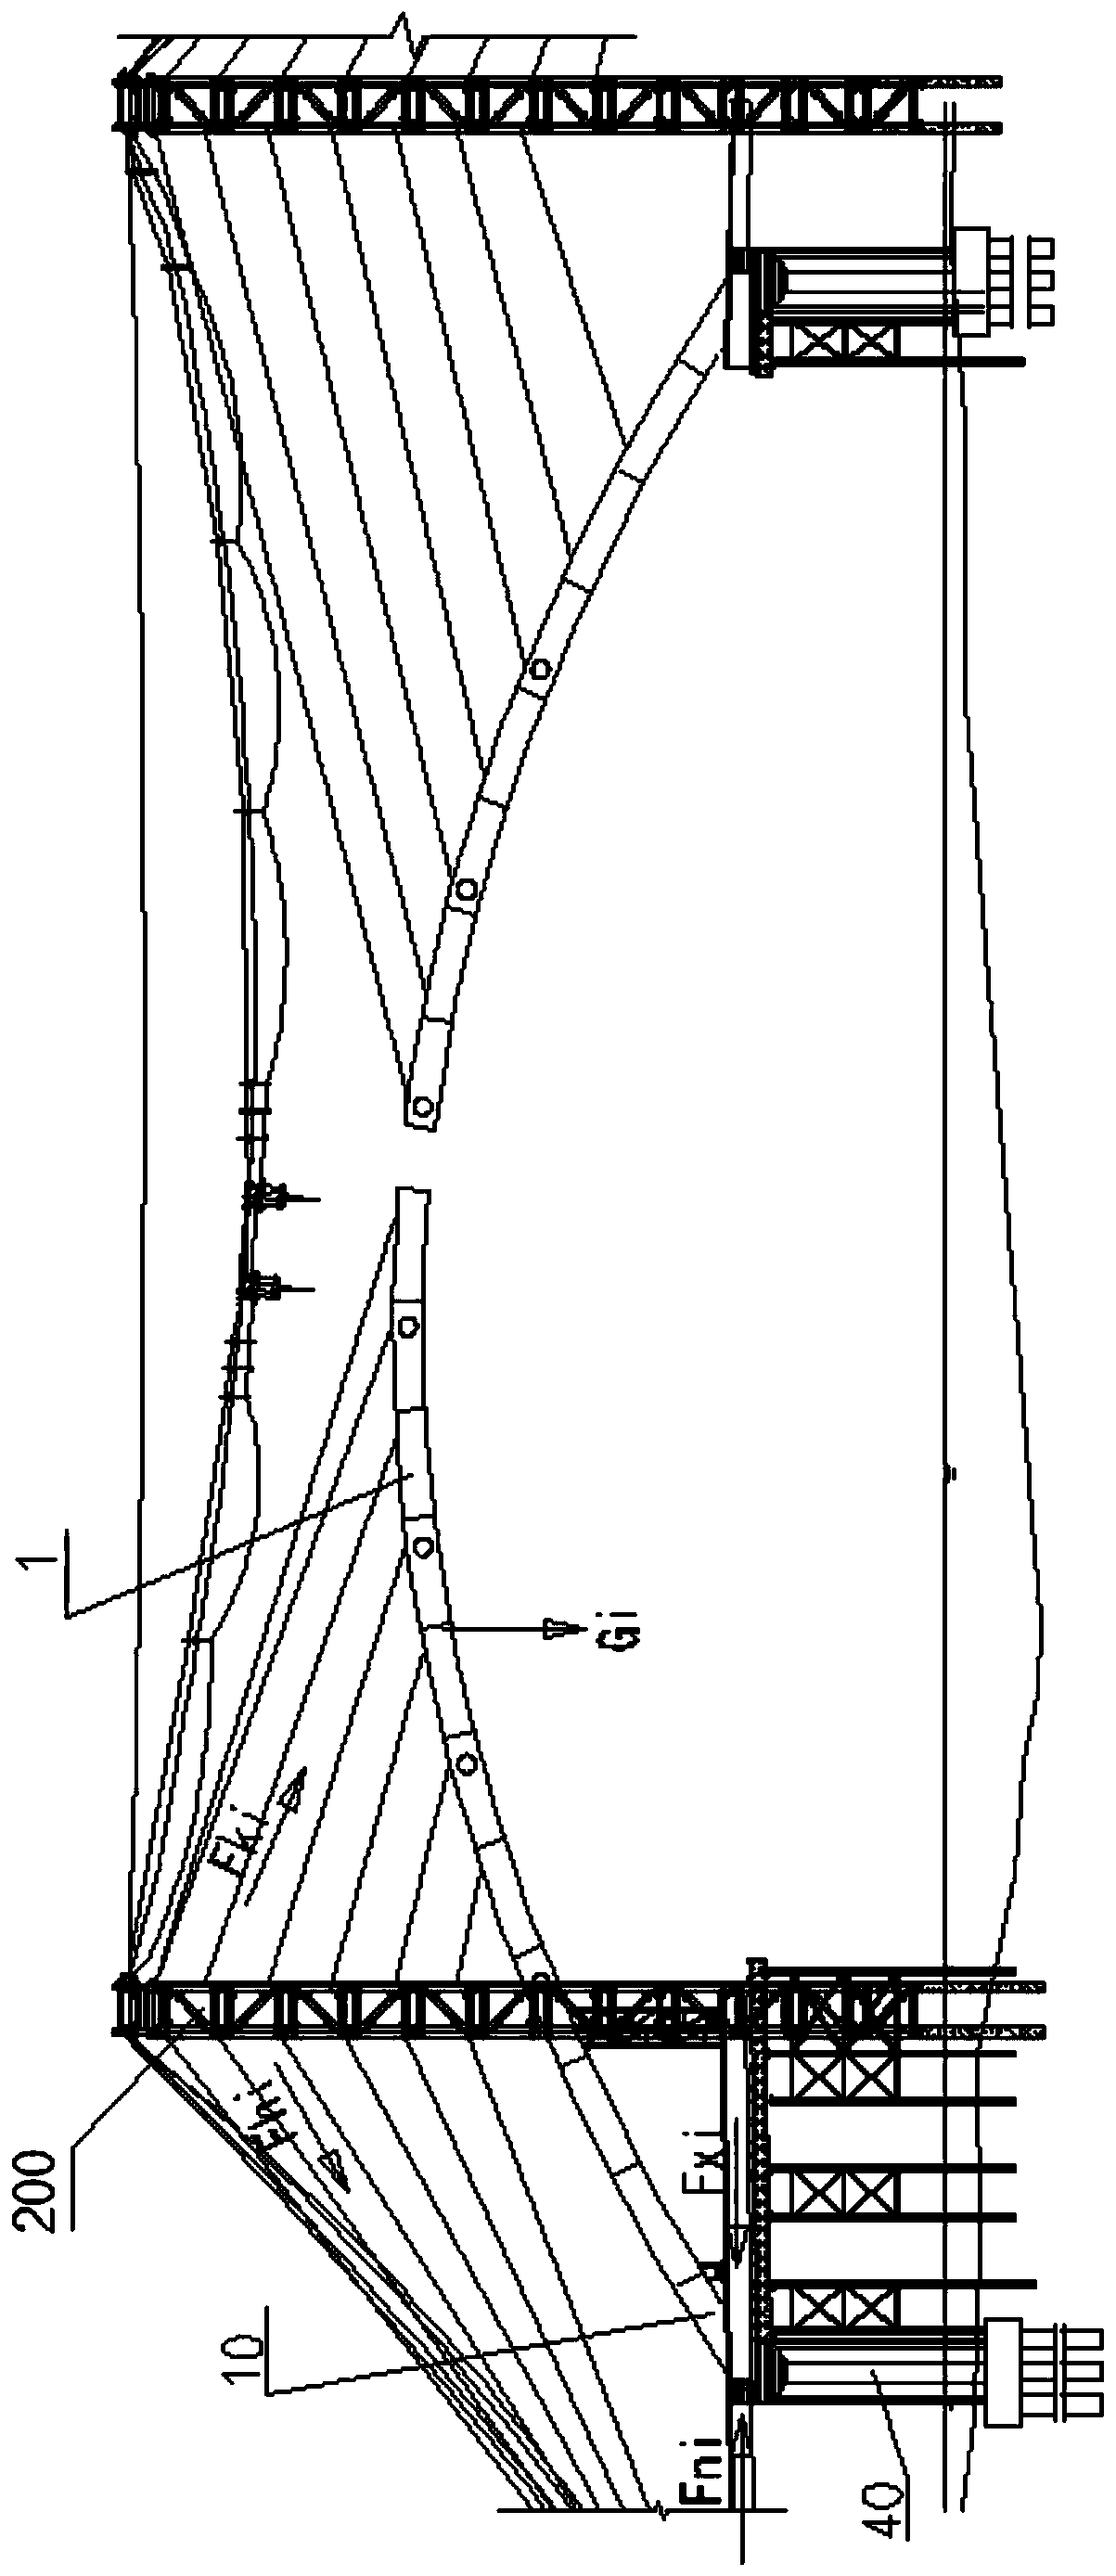 Temporary device for maintaining mechanical equilibrium under first-arch and second-girder bridge construction process